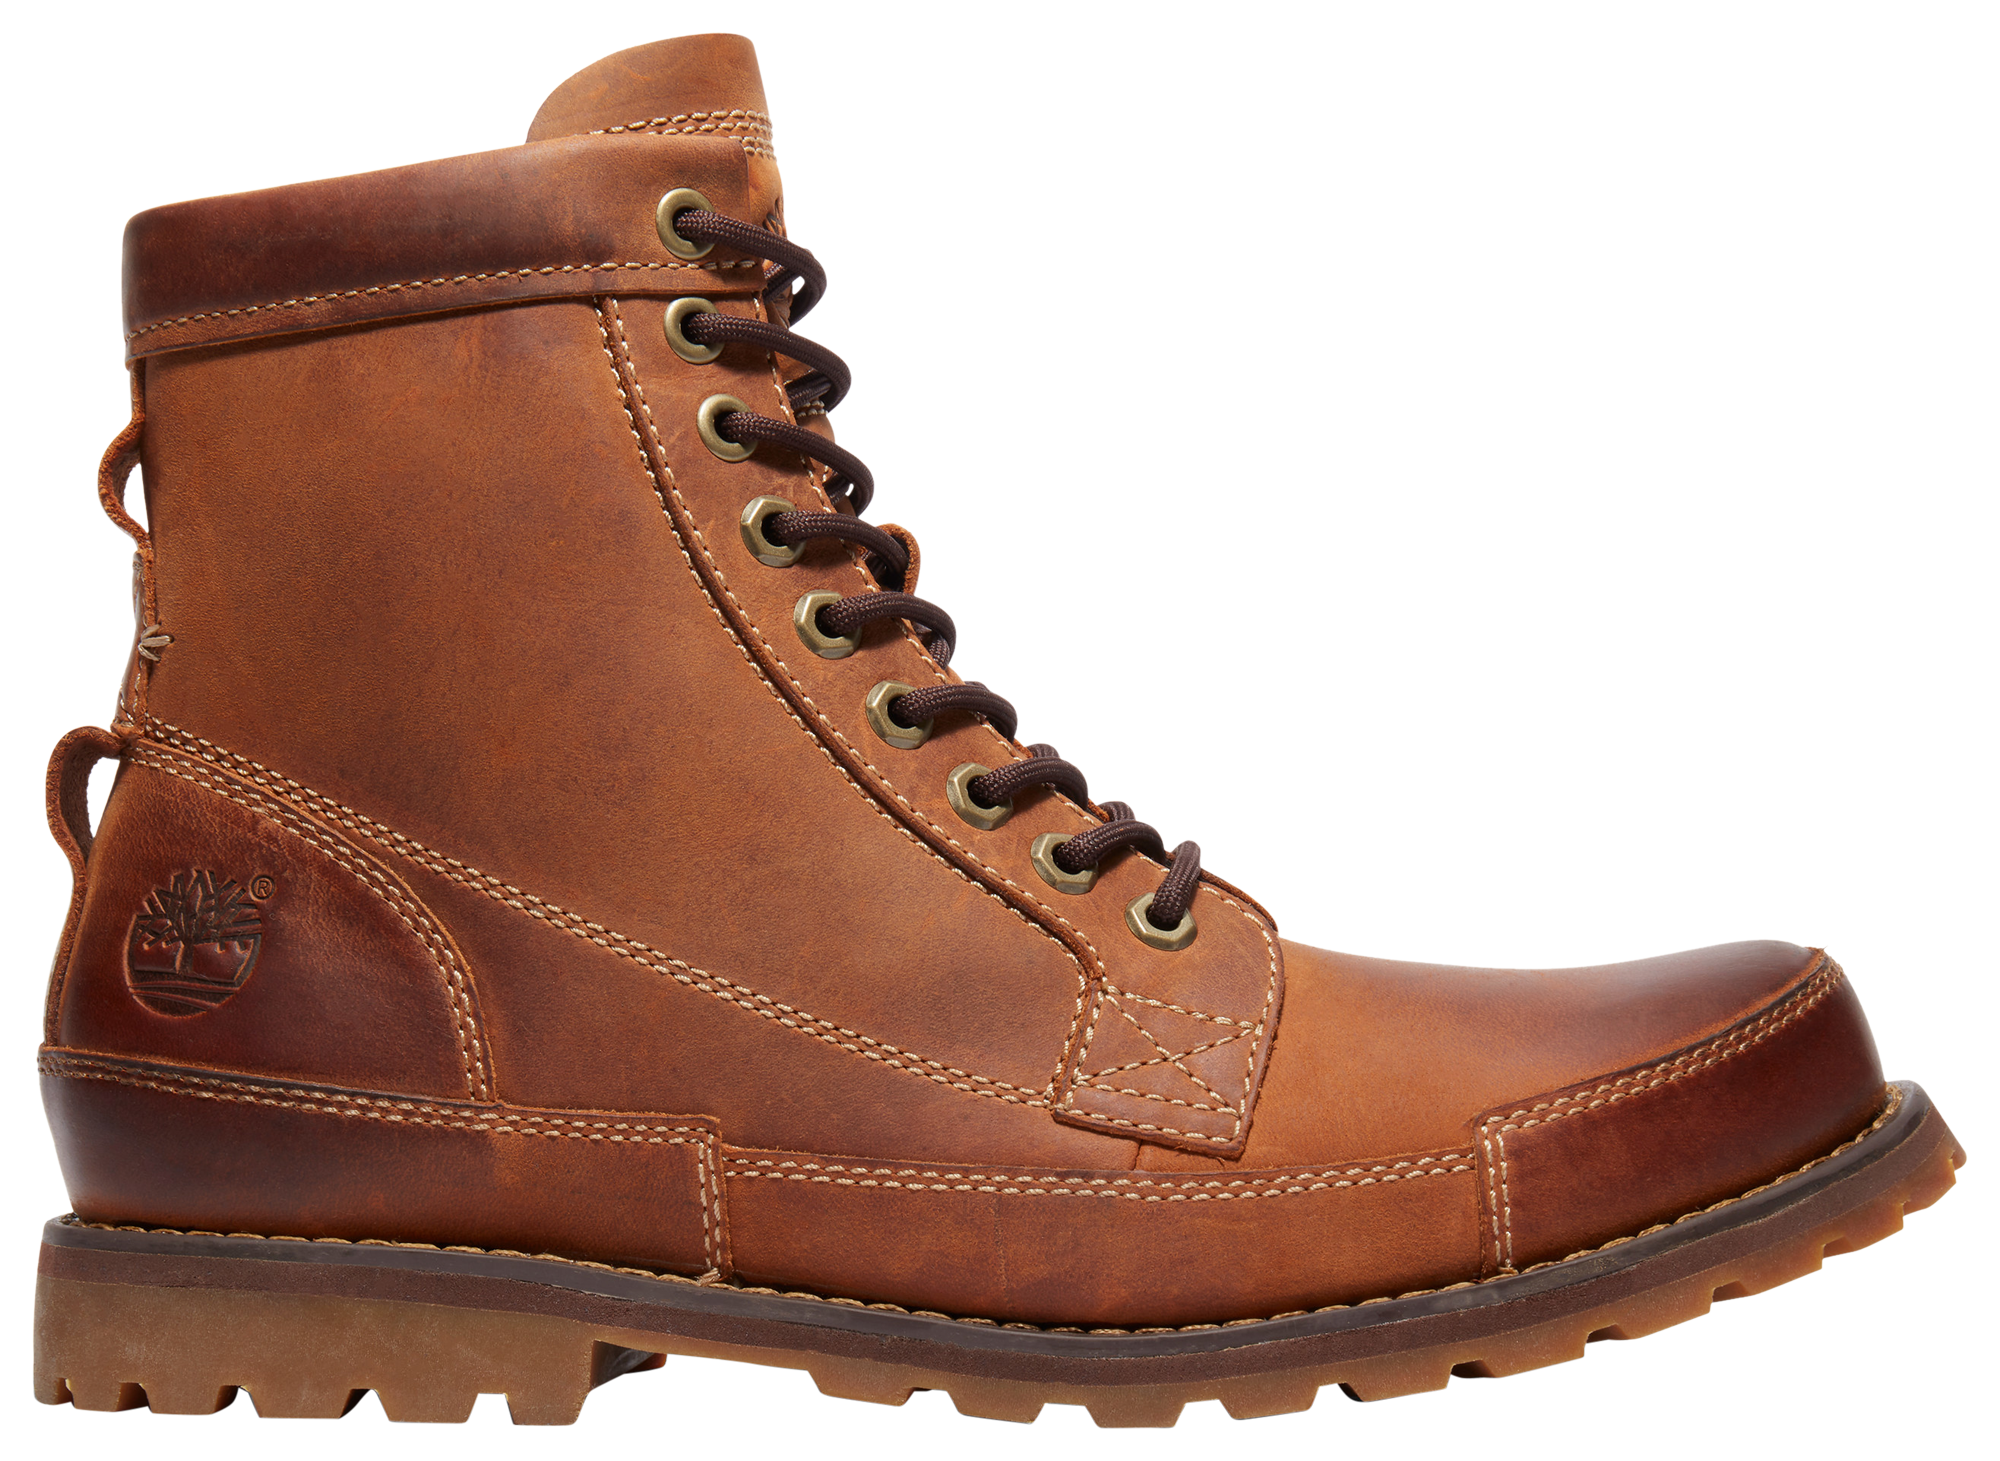 Timberland Earthkeepers 6" Boots